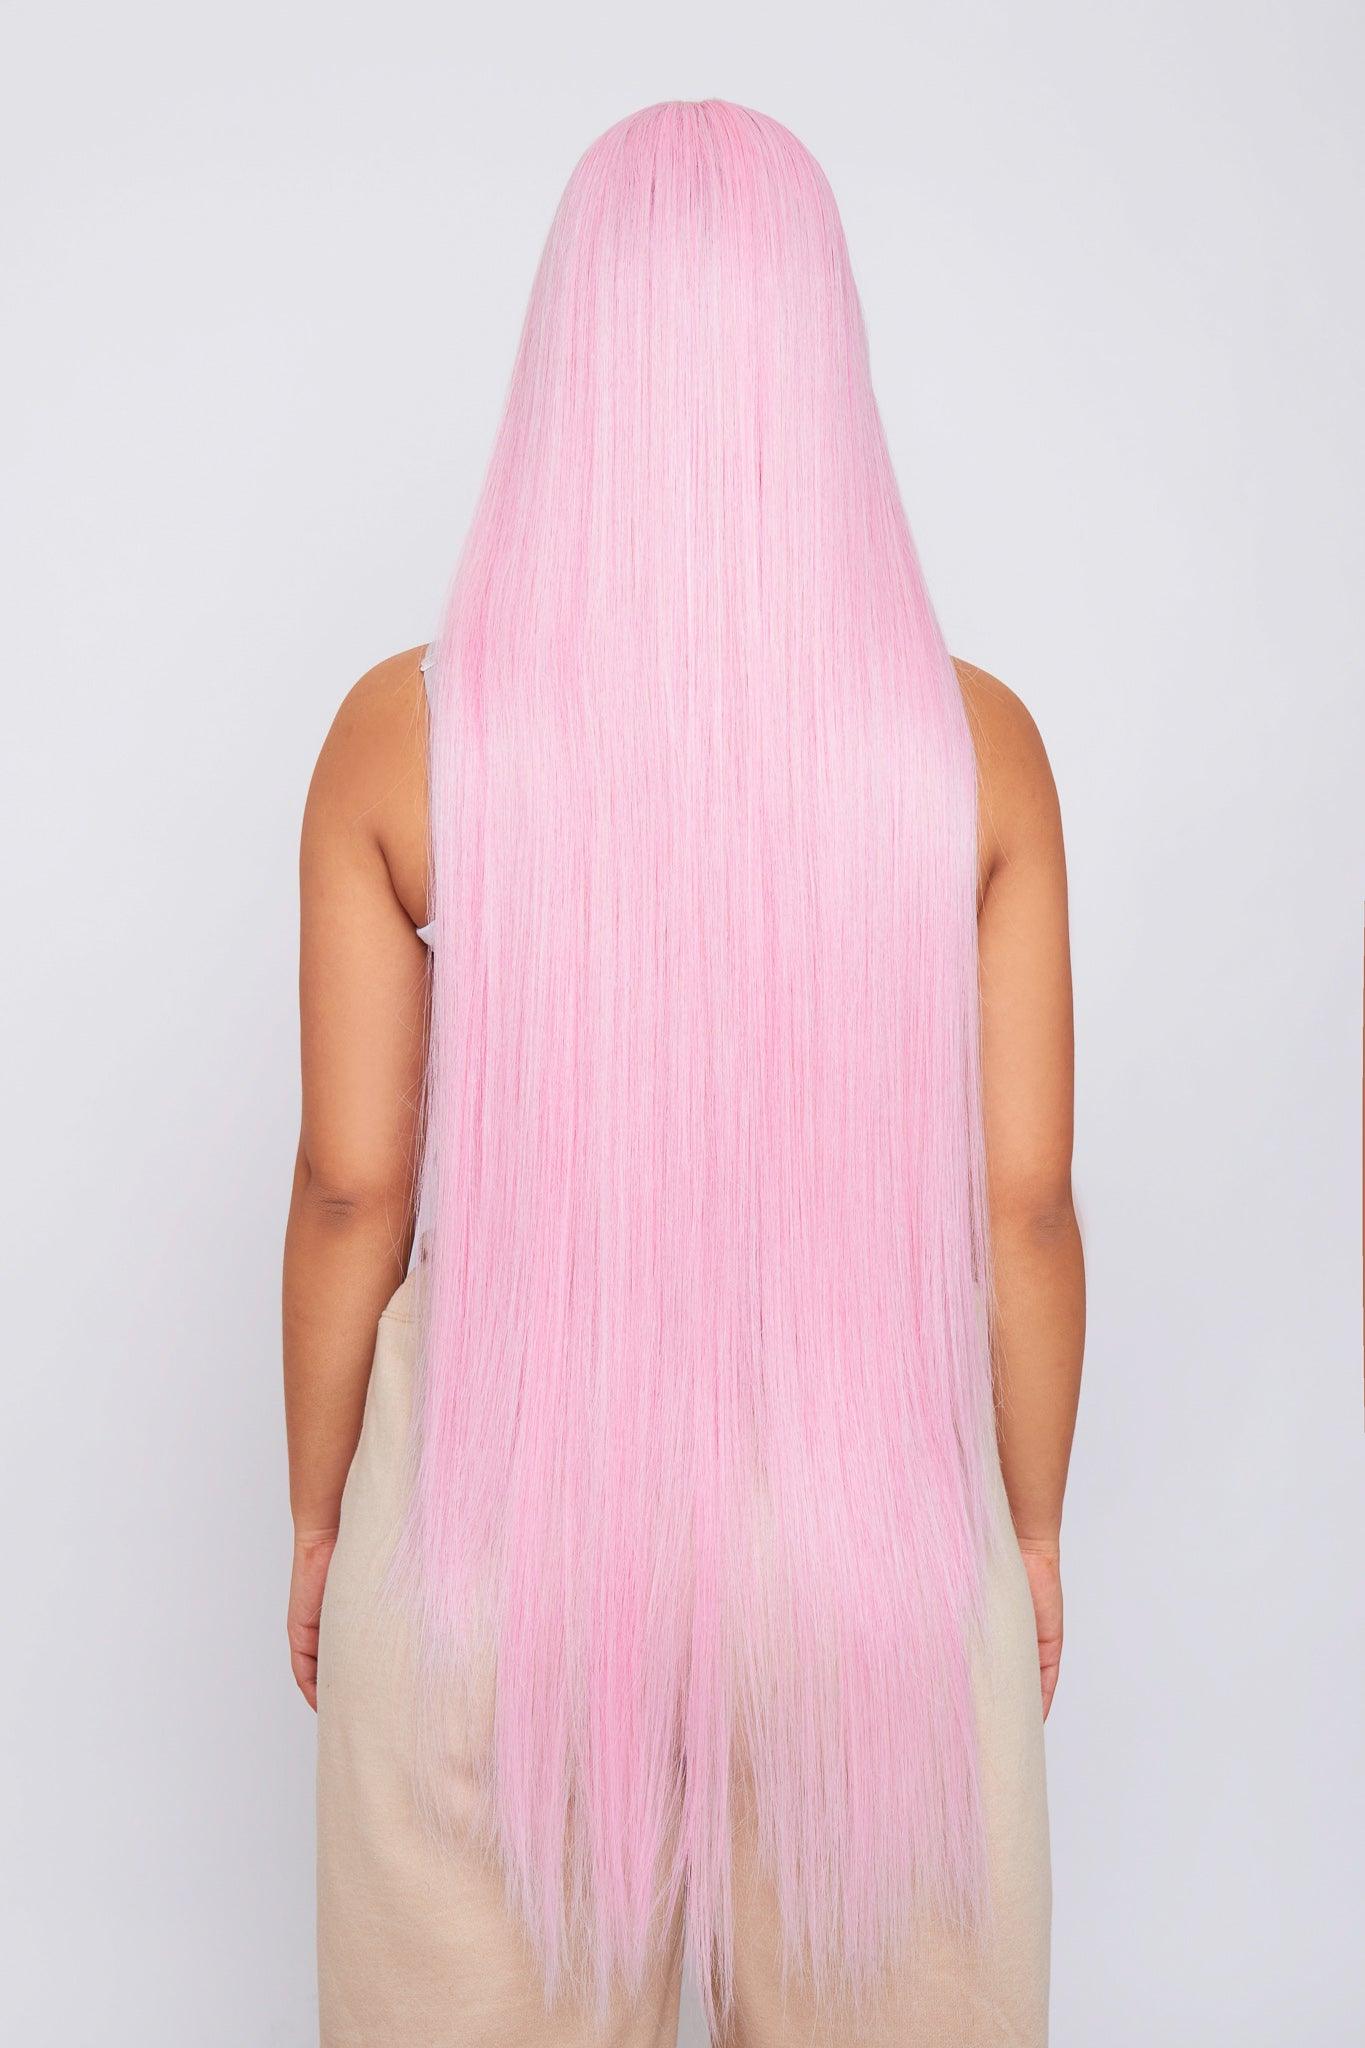 long straight pink synthetic hair wig on model